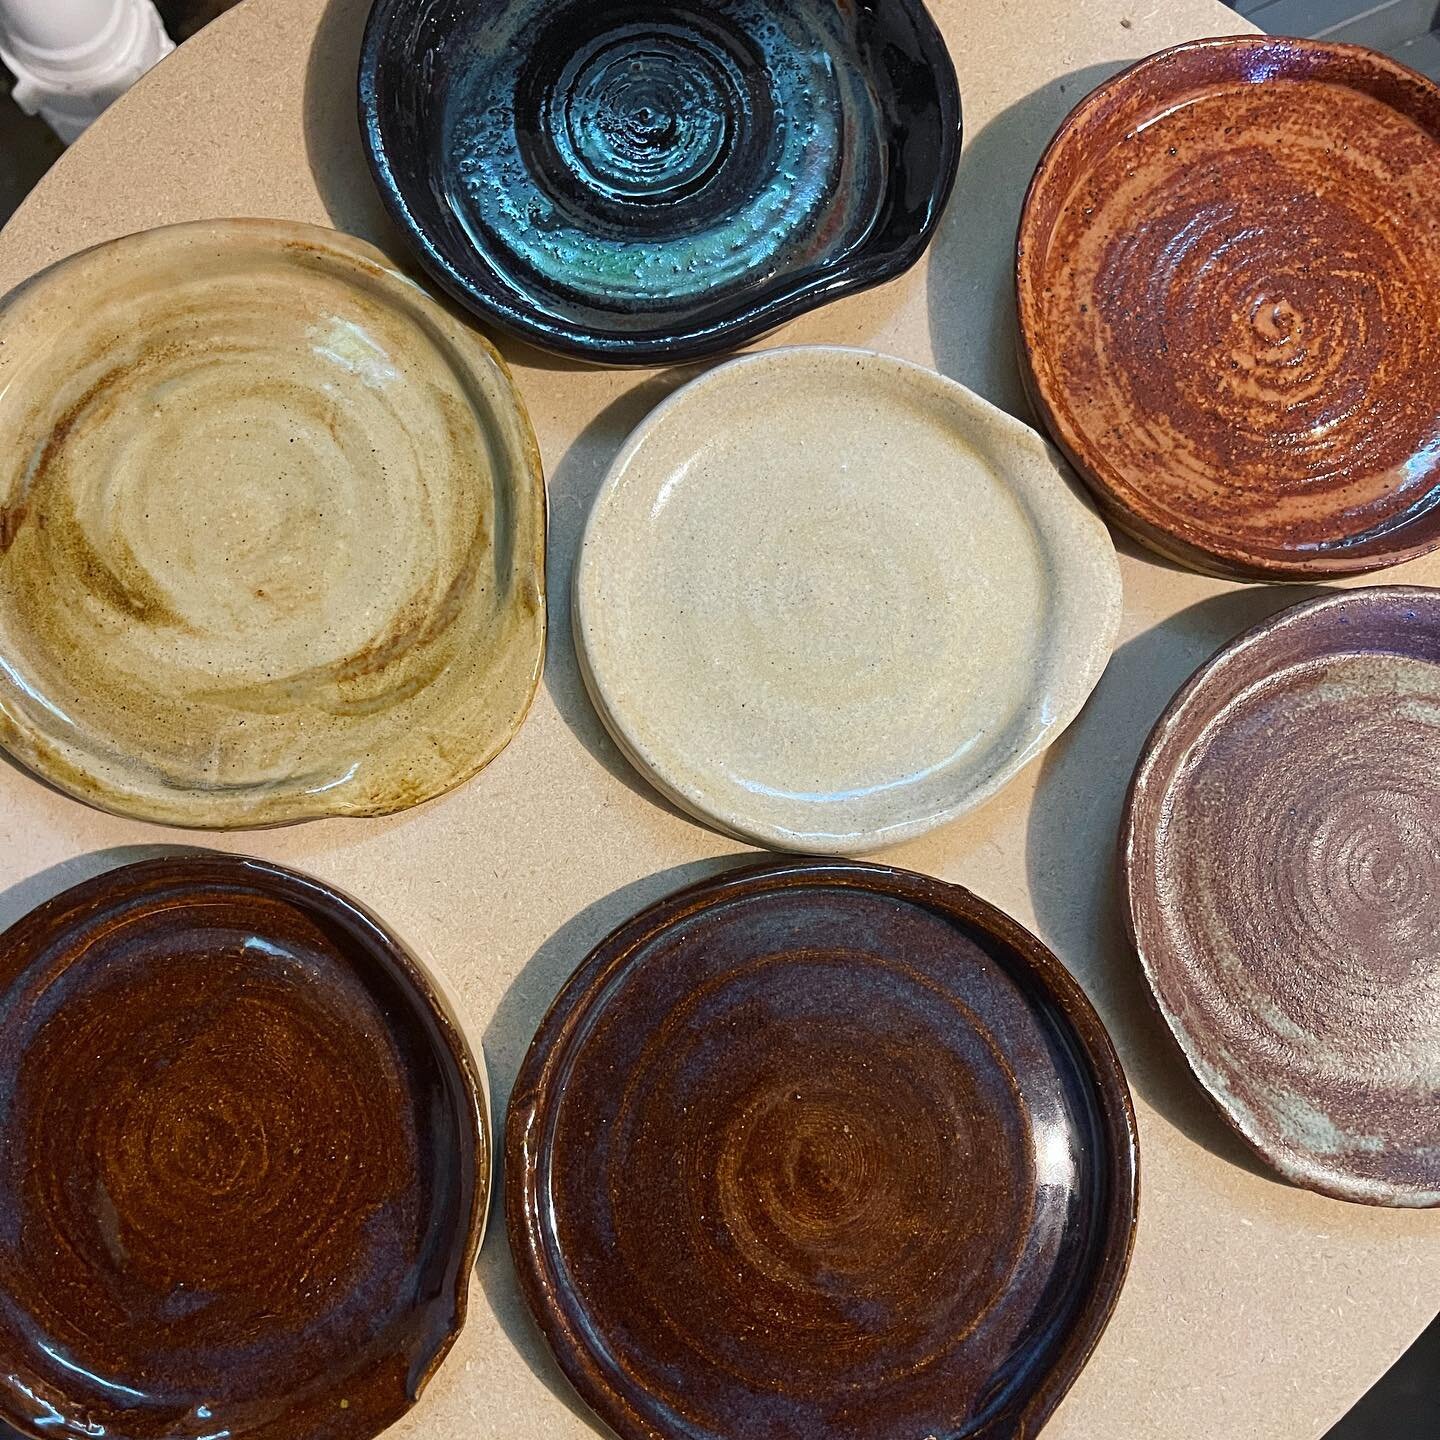 More glaze testing! This is something I could do everyday! It&rsquo;s like swatching paint, I never get tired of it! I&rsquo;m so in love with everything to do with the process of pottery. We are going out of town for a week and I&rsquo;m going to tr